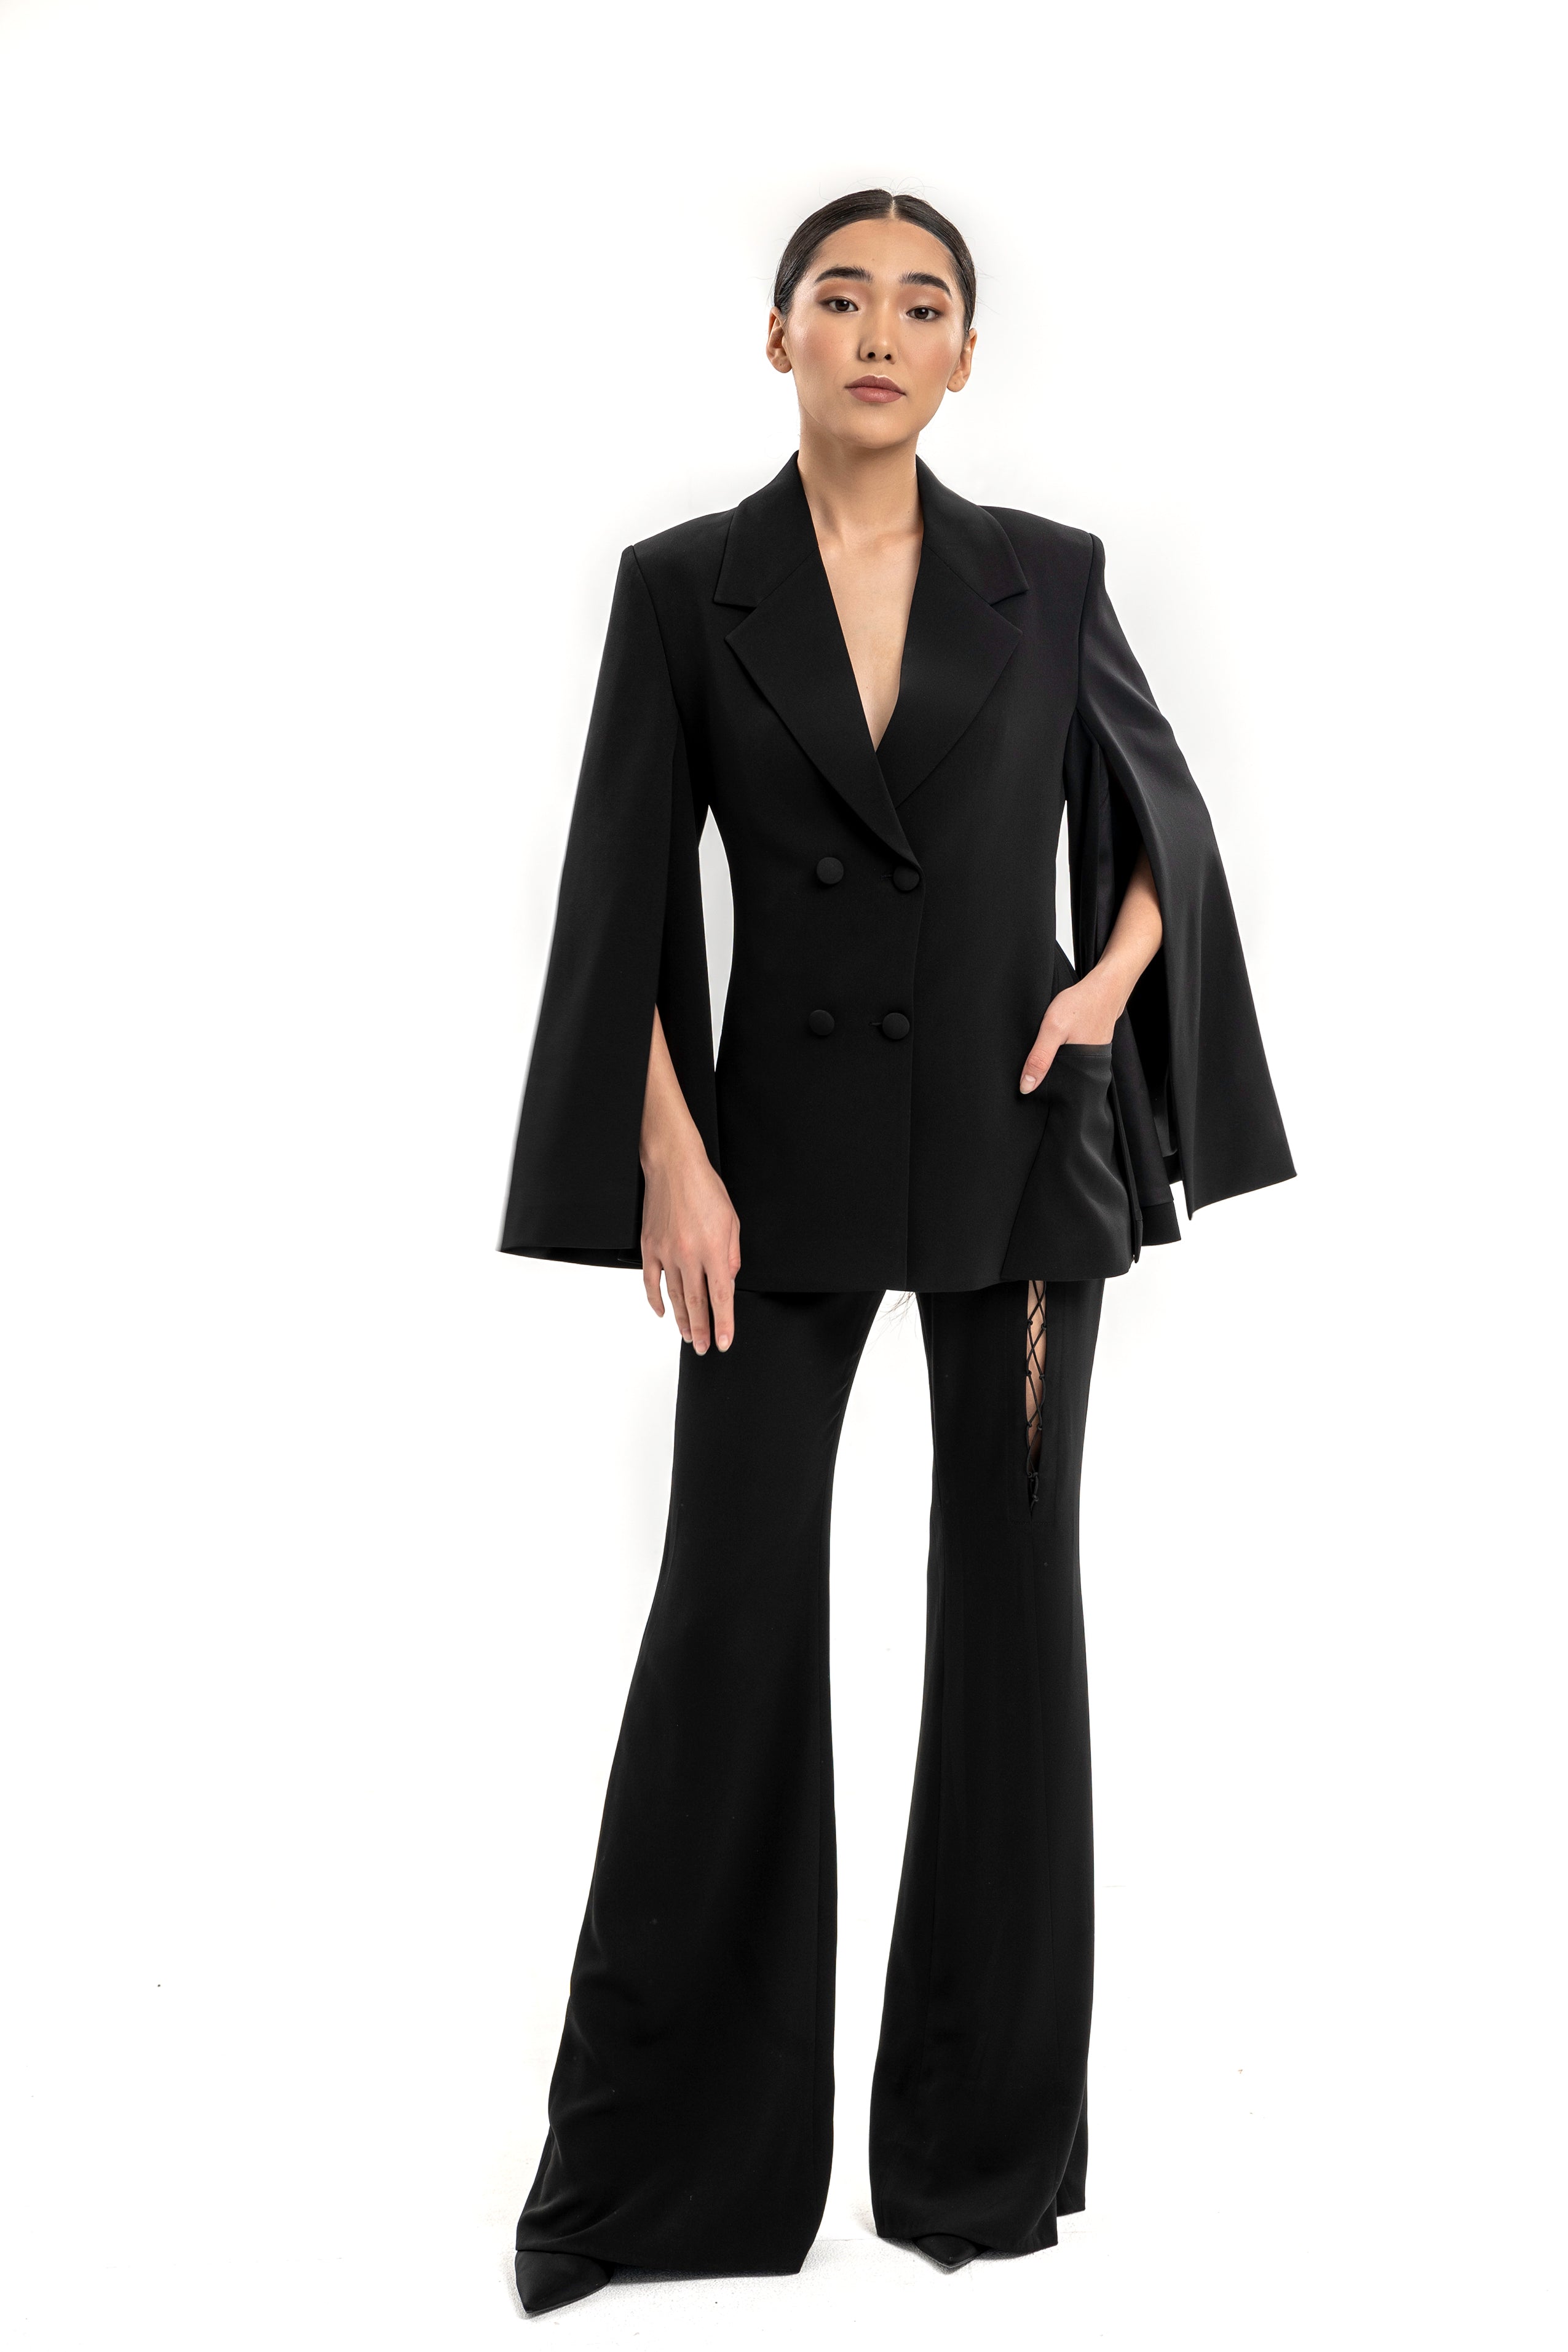 The Flamme Femme Suit By Lili Blanc